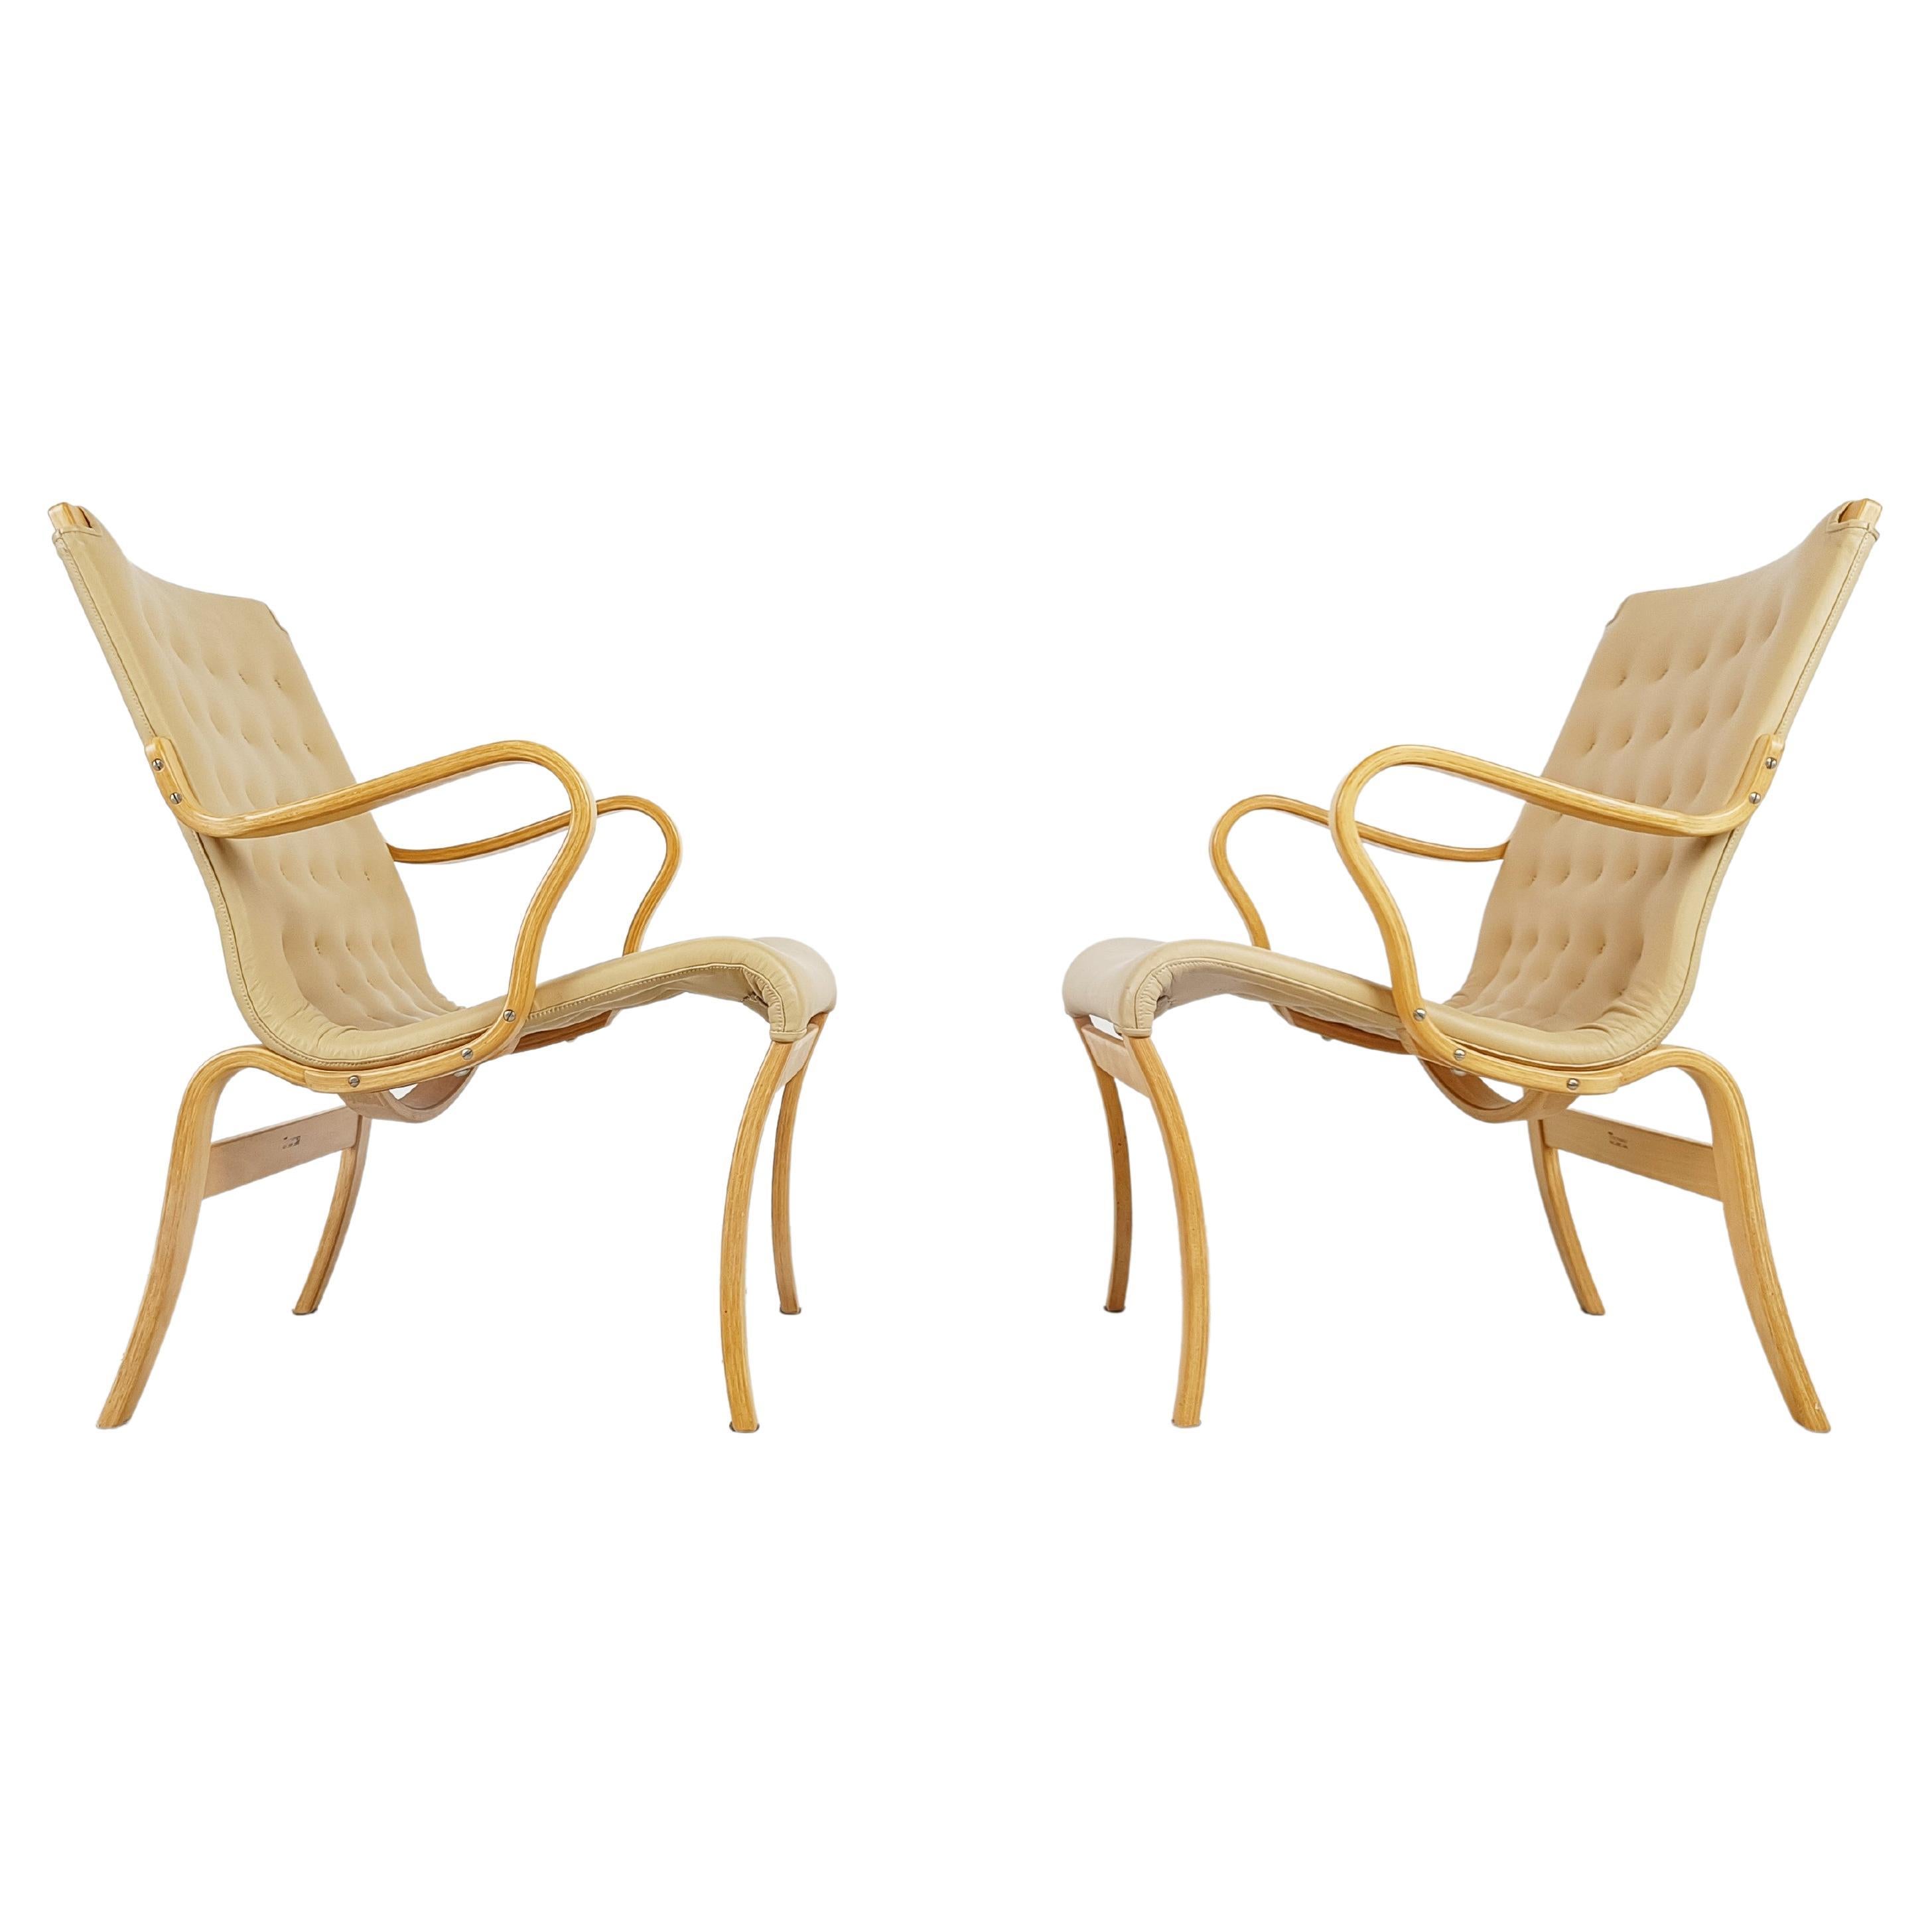 Pair of Mina Armchairs by Bruno Mathsson, 1960s For Sale